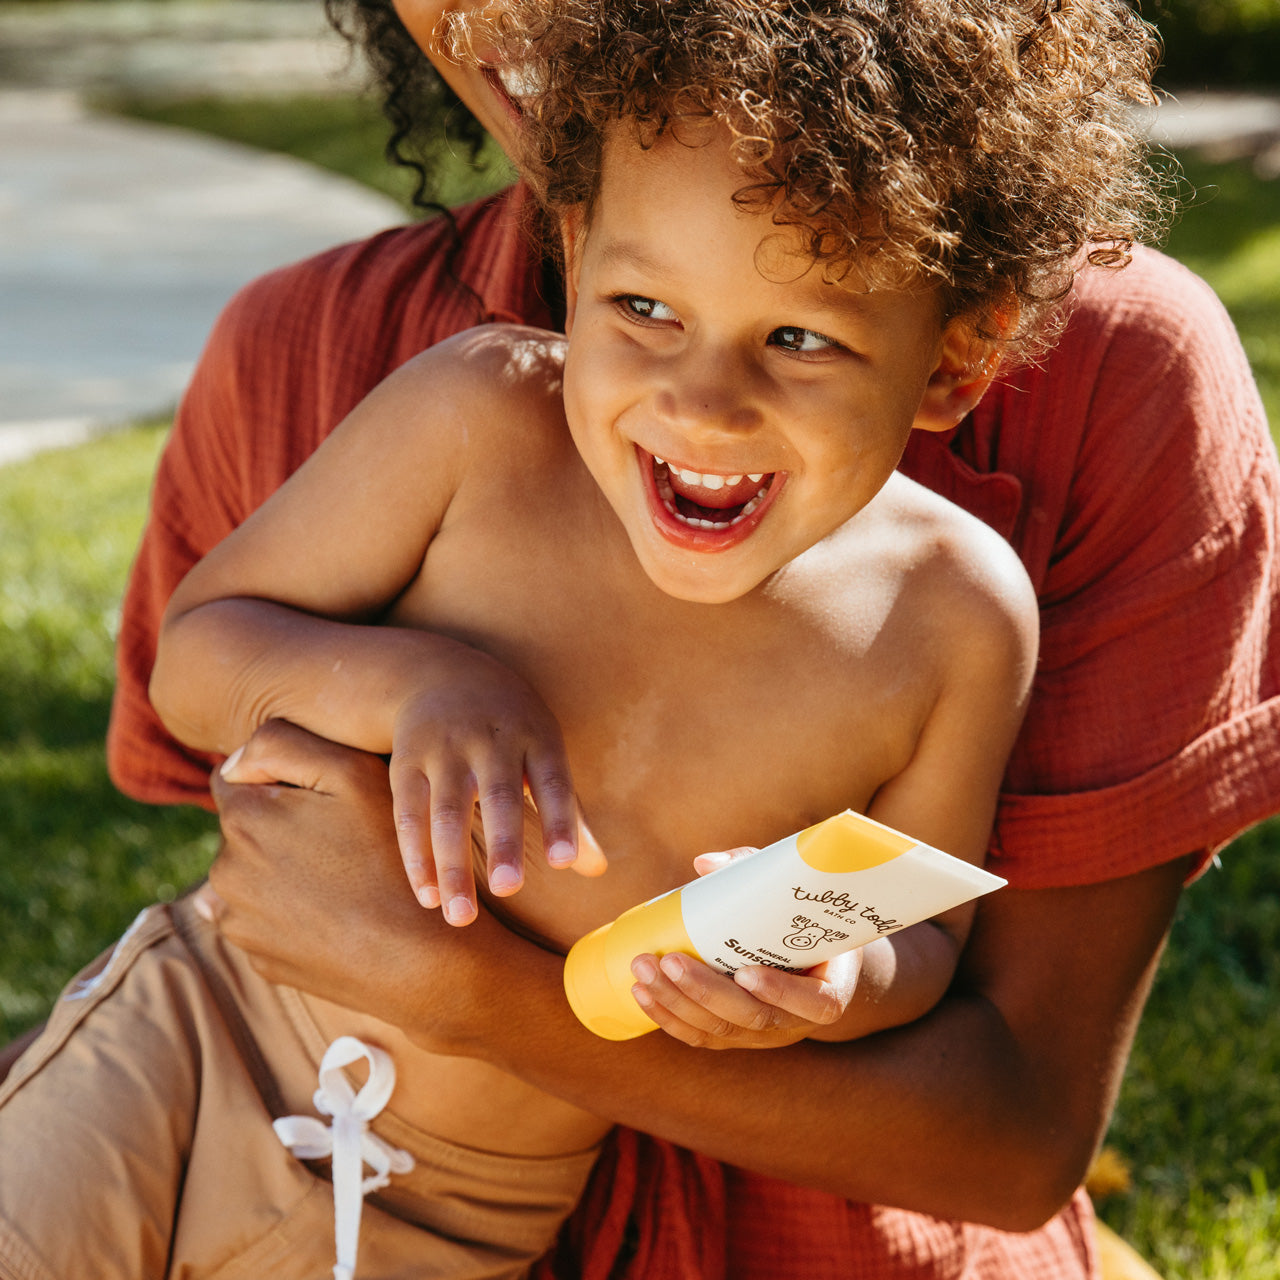 Mom holding laughing child on grass while holding sunscreen